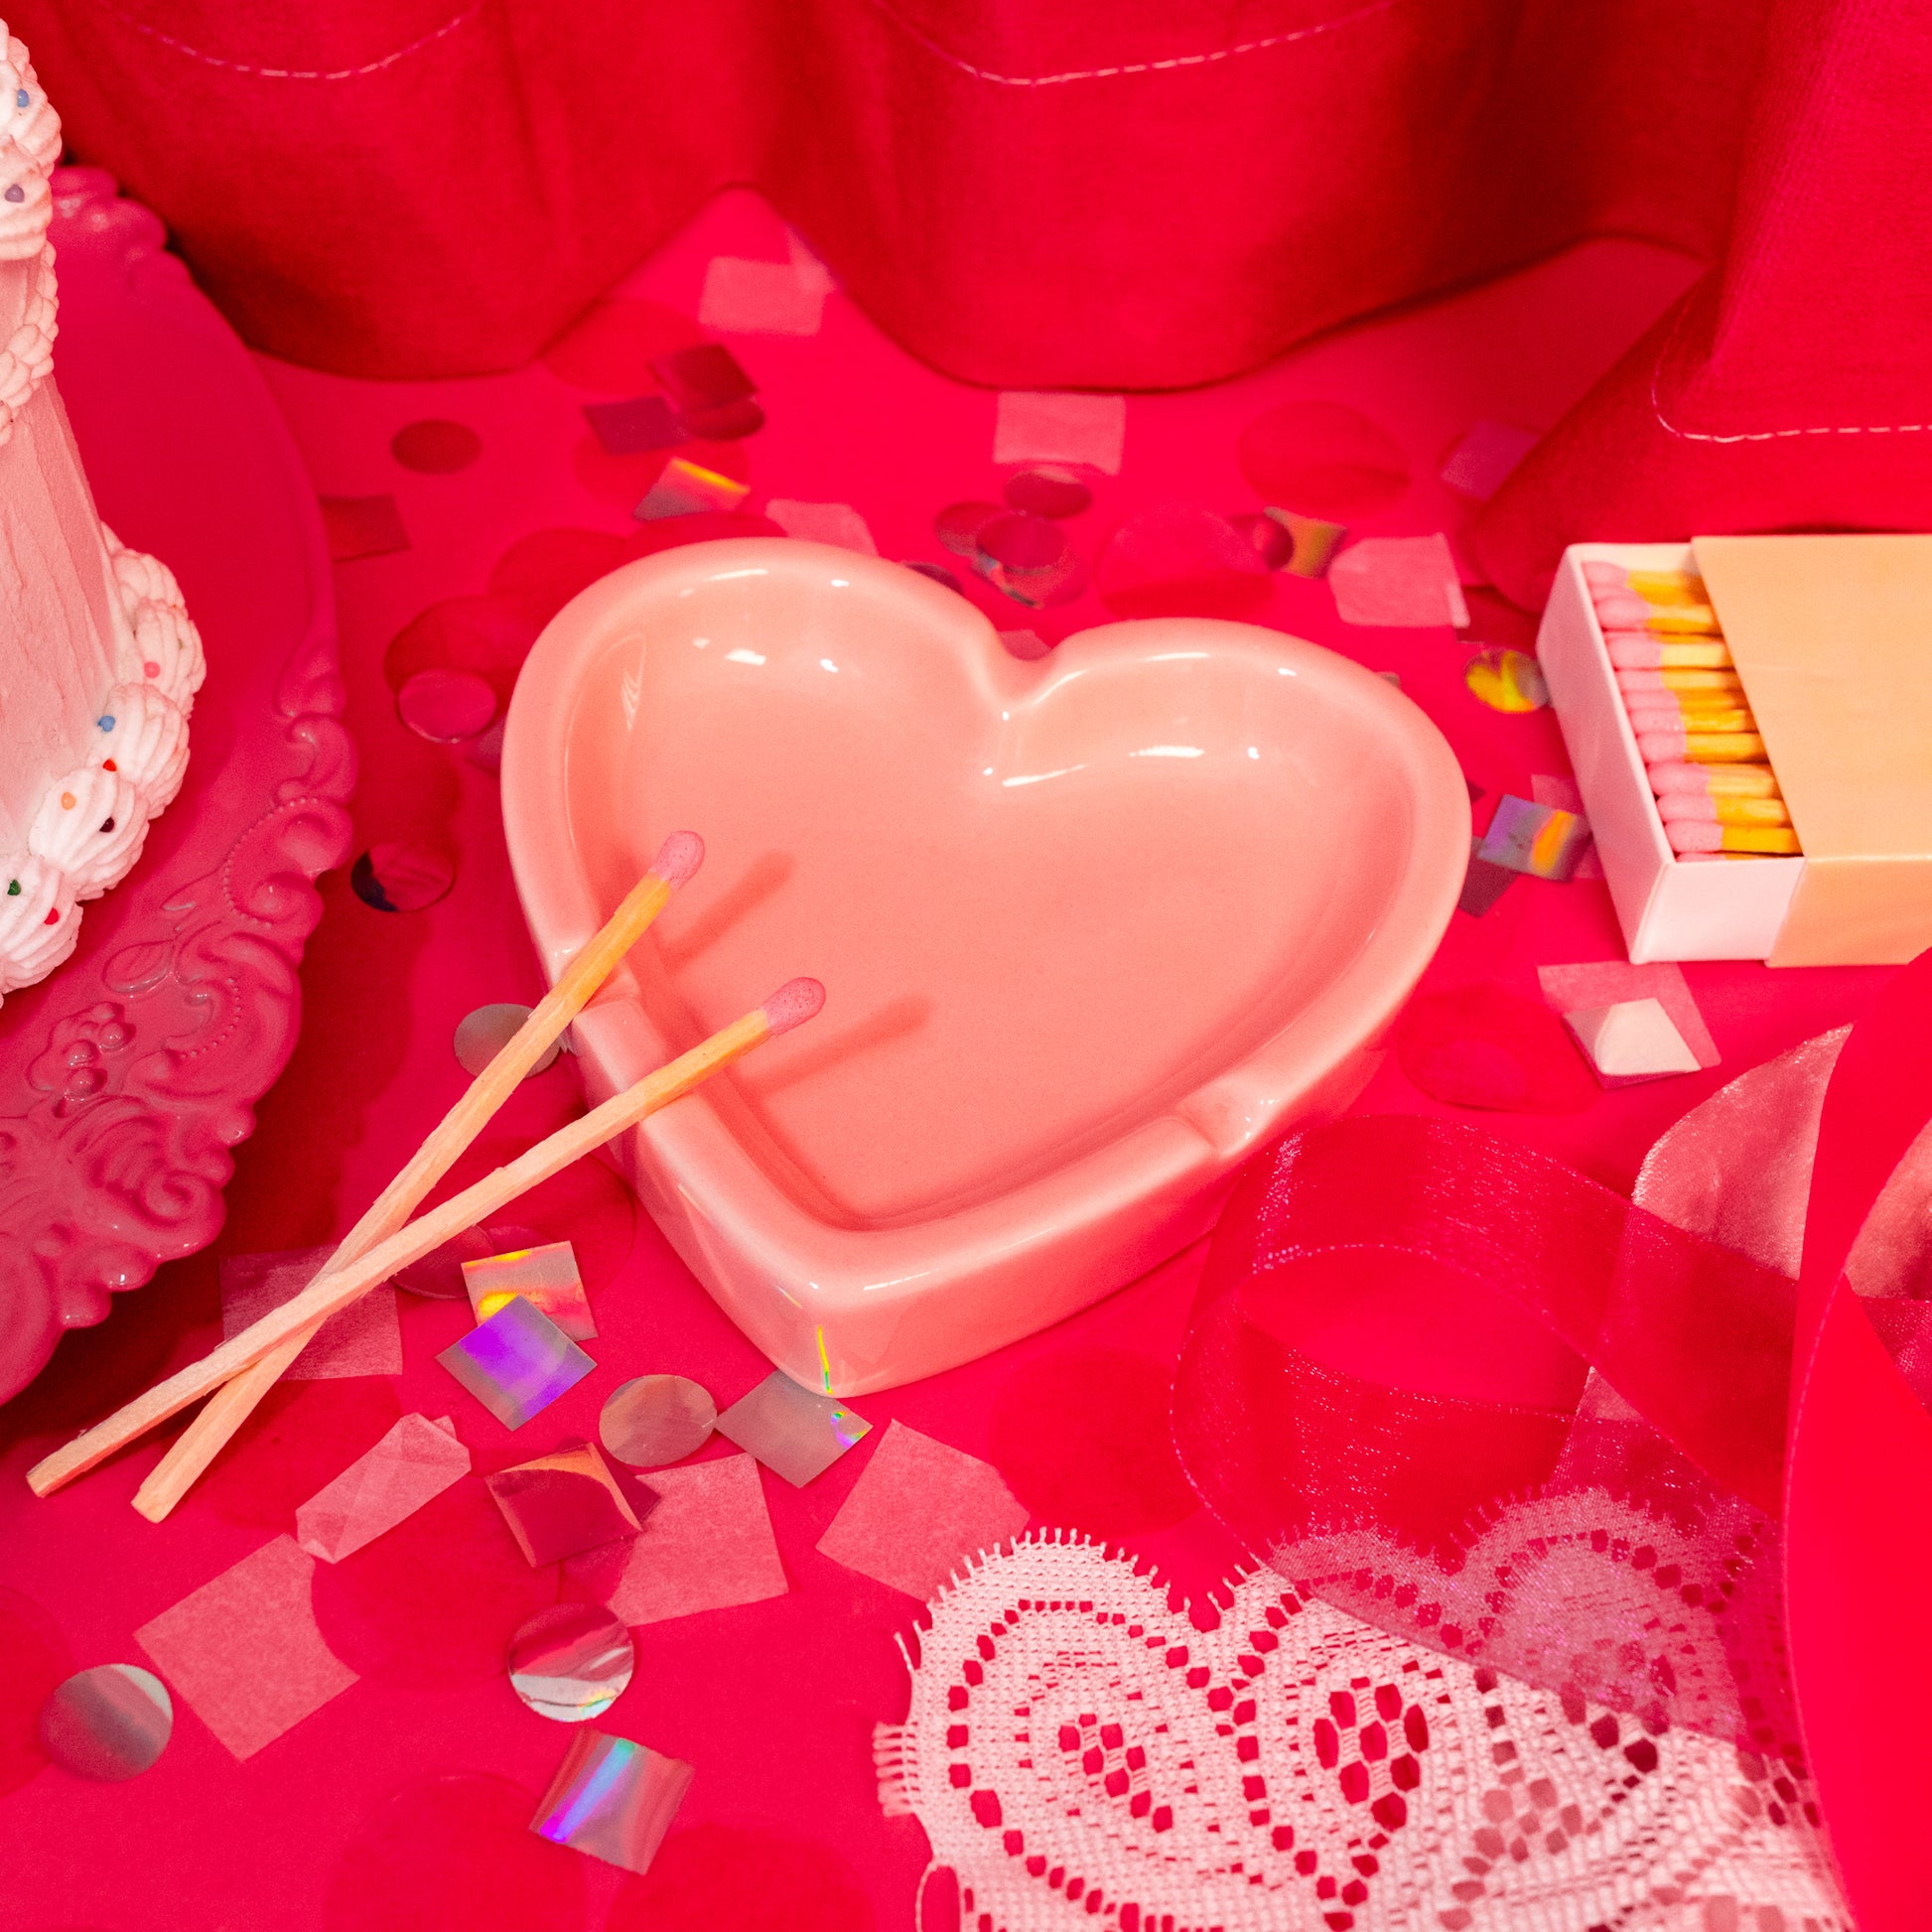 pink heart dish with matches